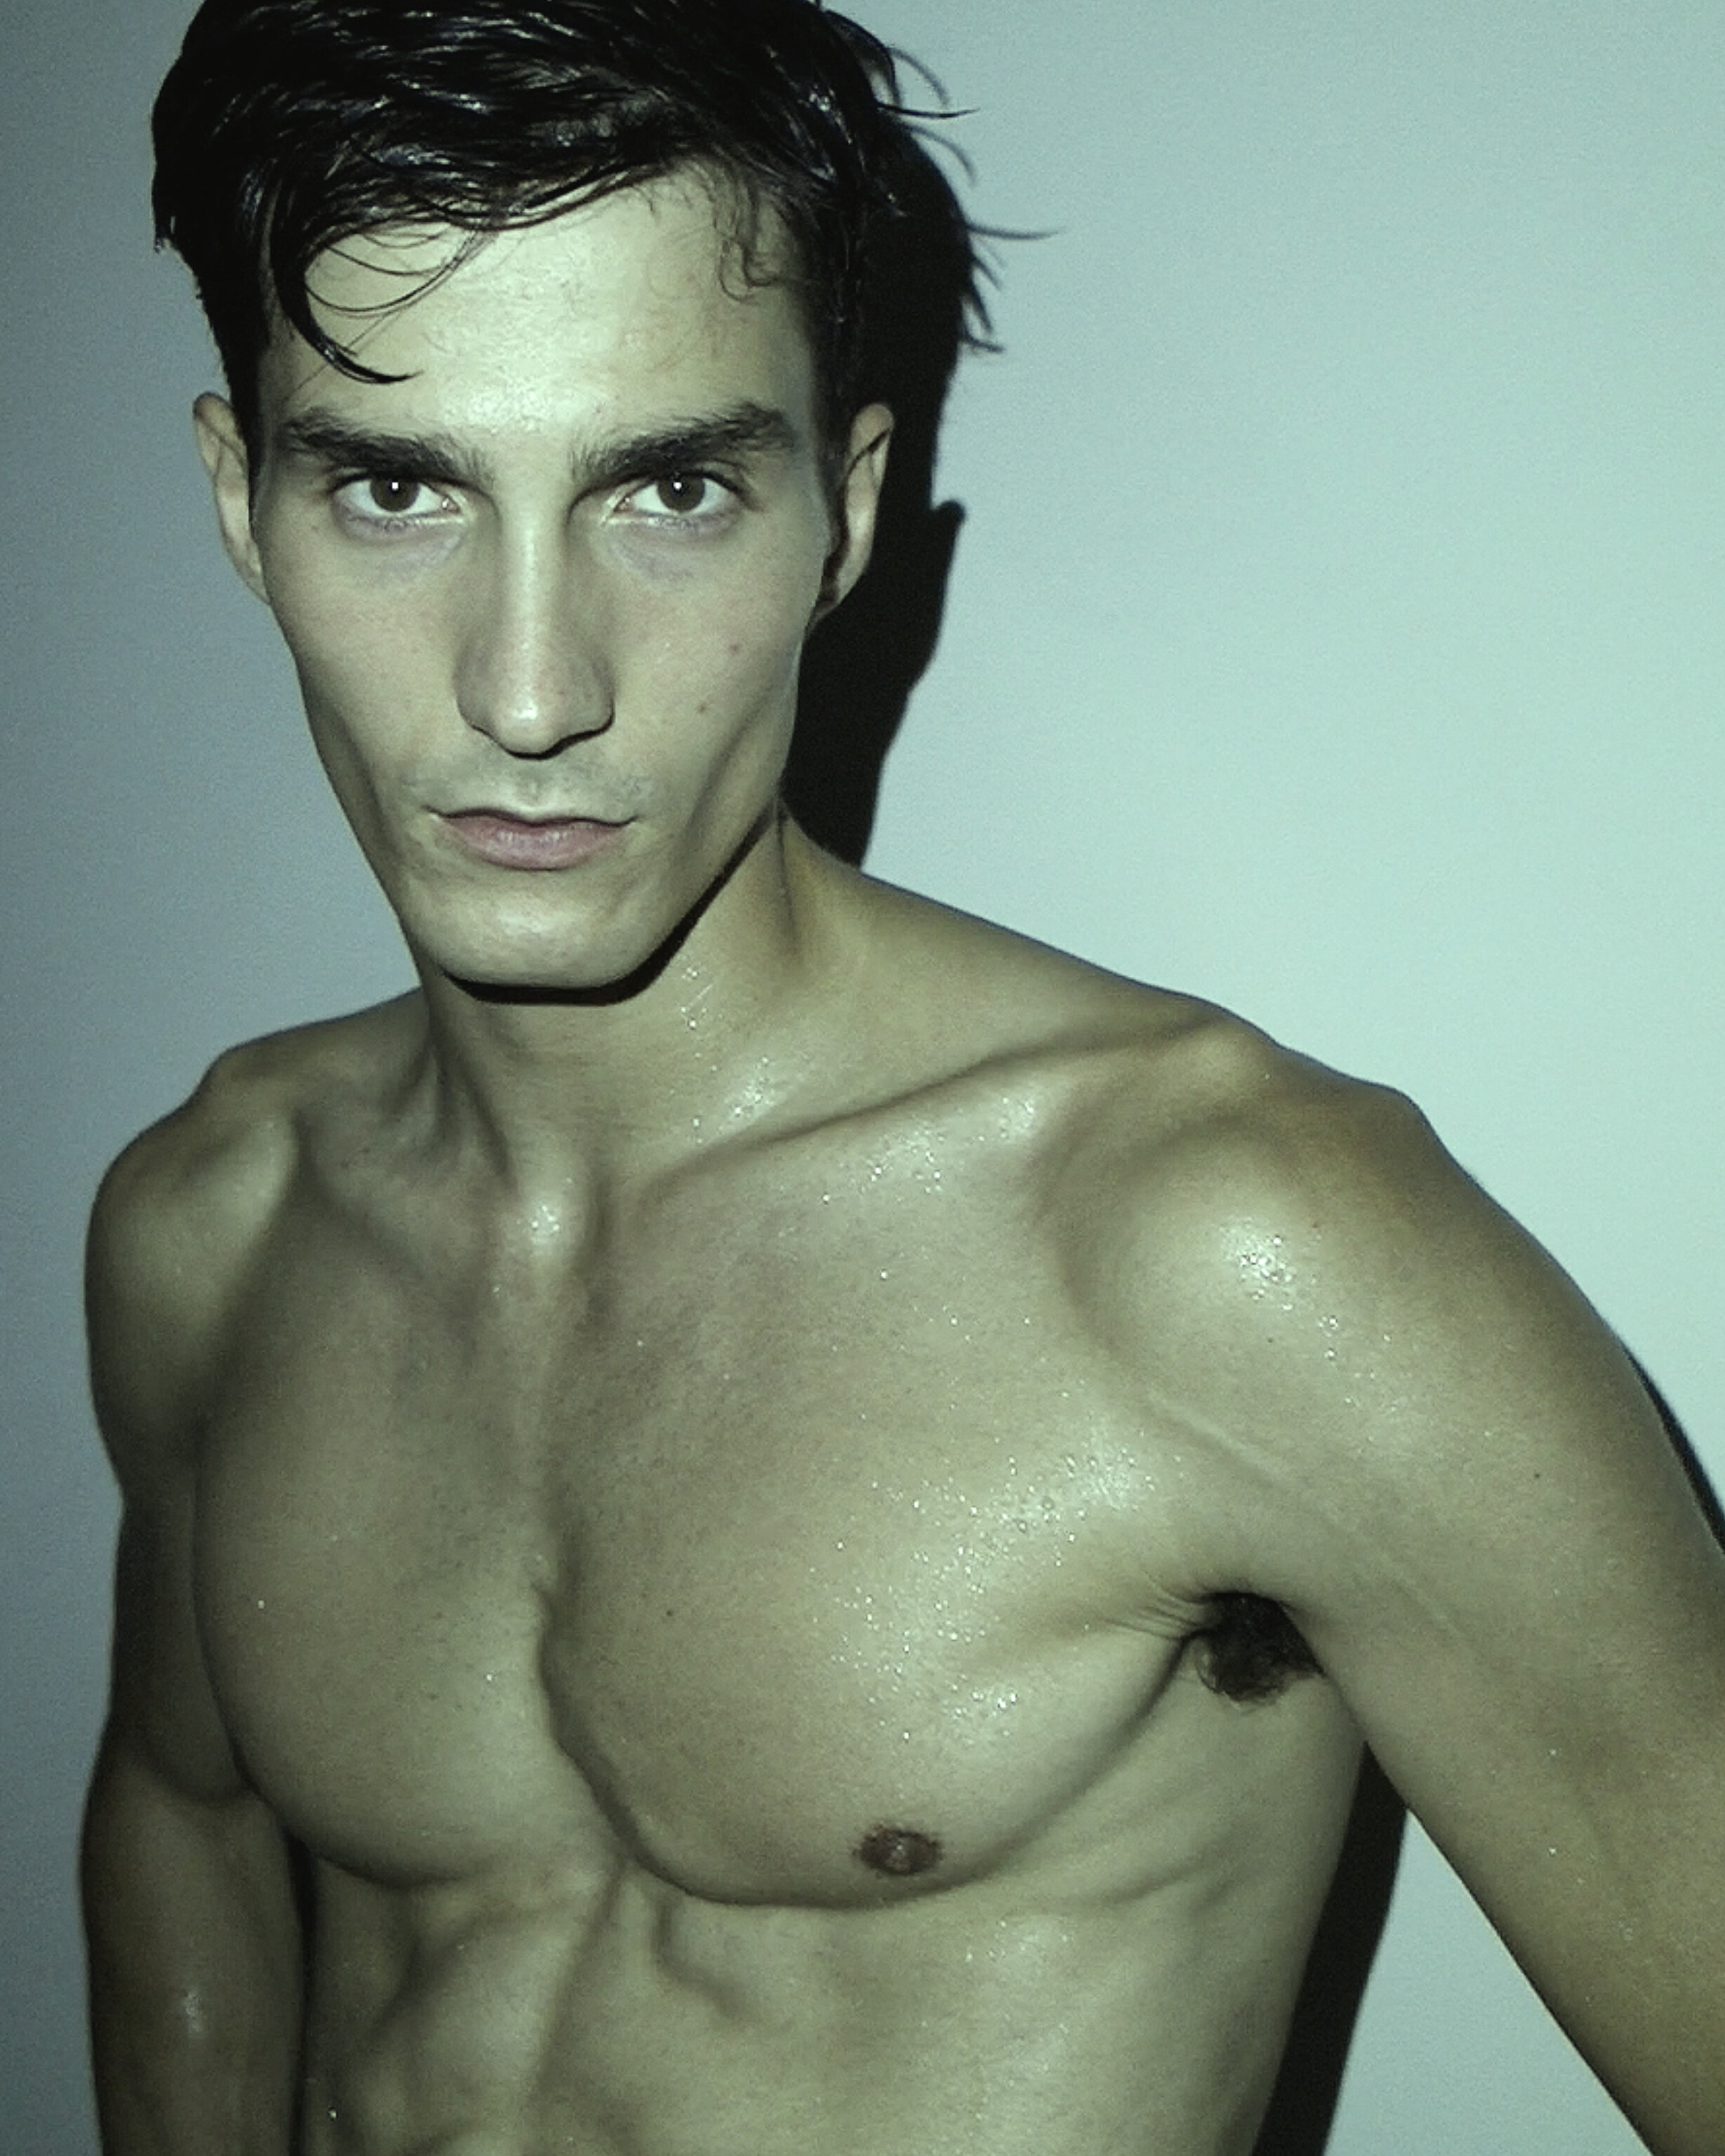 Featuring Tony Pilato photographed by Ron Wan in Milan, Italy.